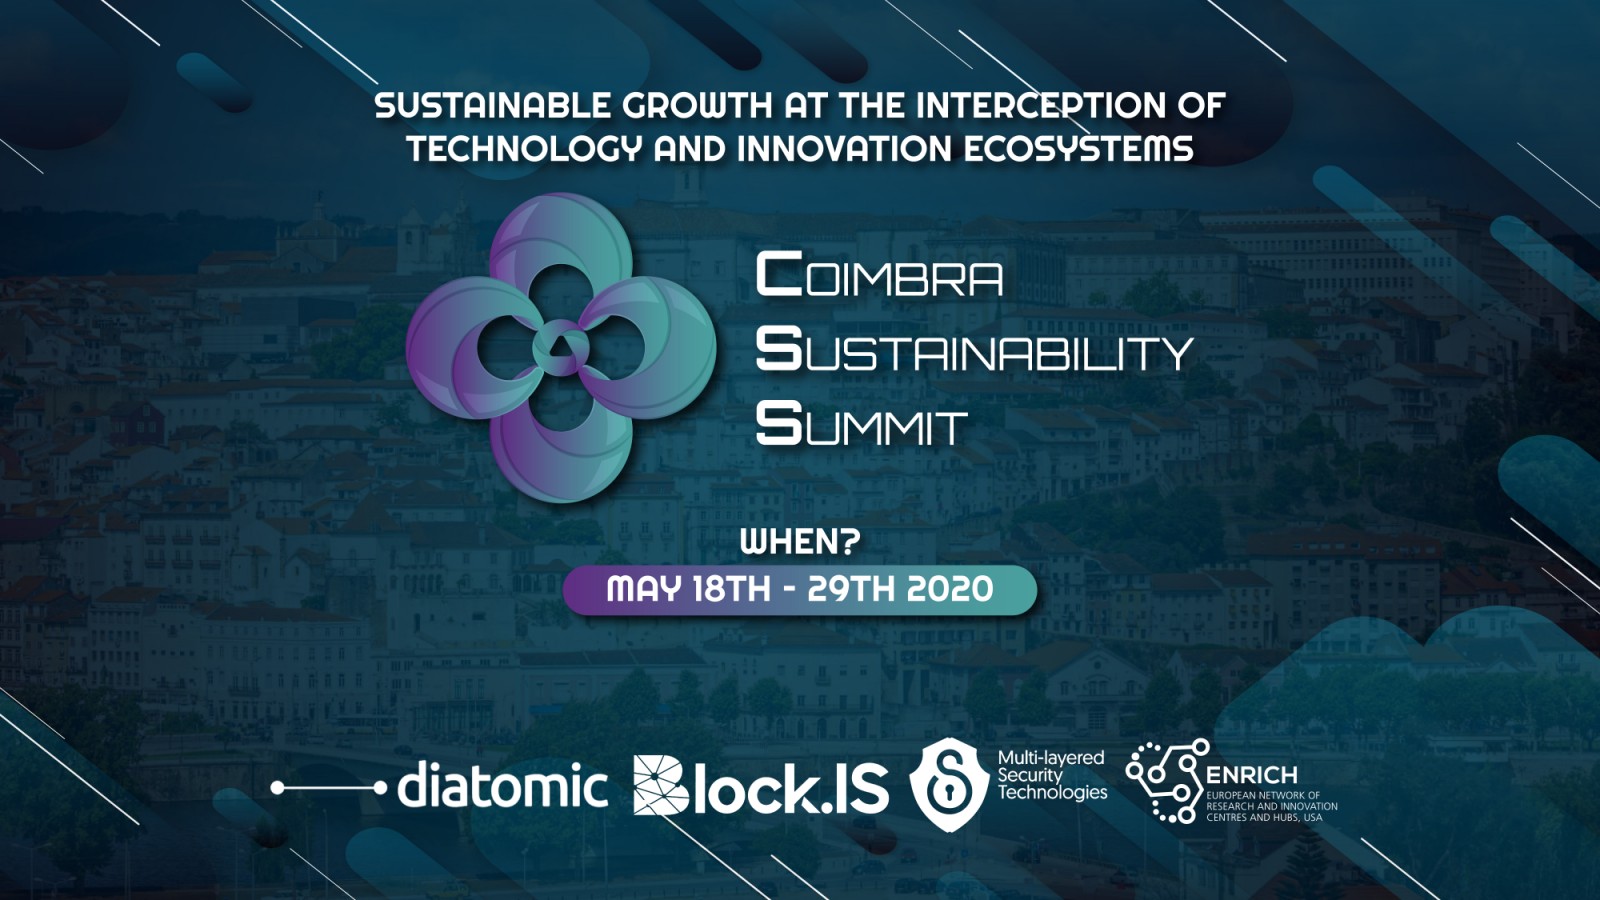 ENRICH in the USA at the Coimbra Sustainability Summit 2020